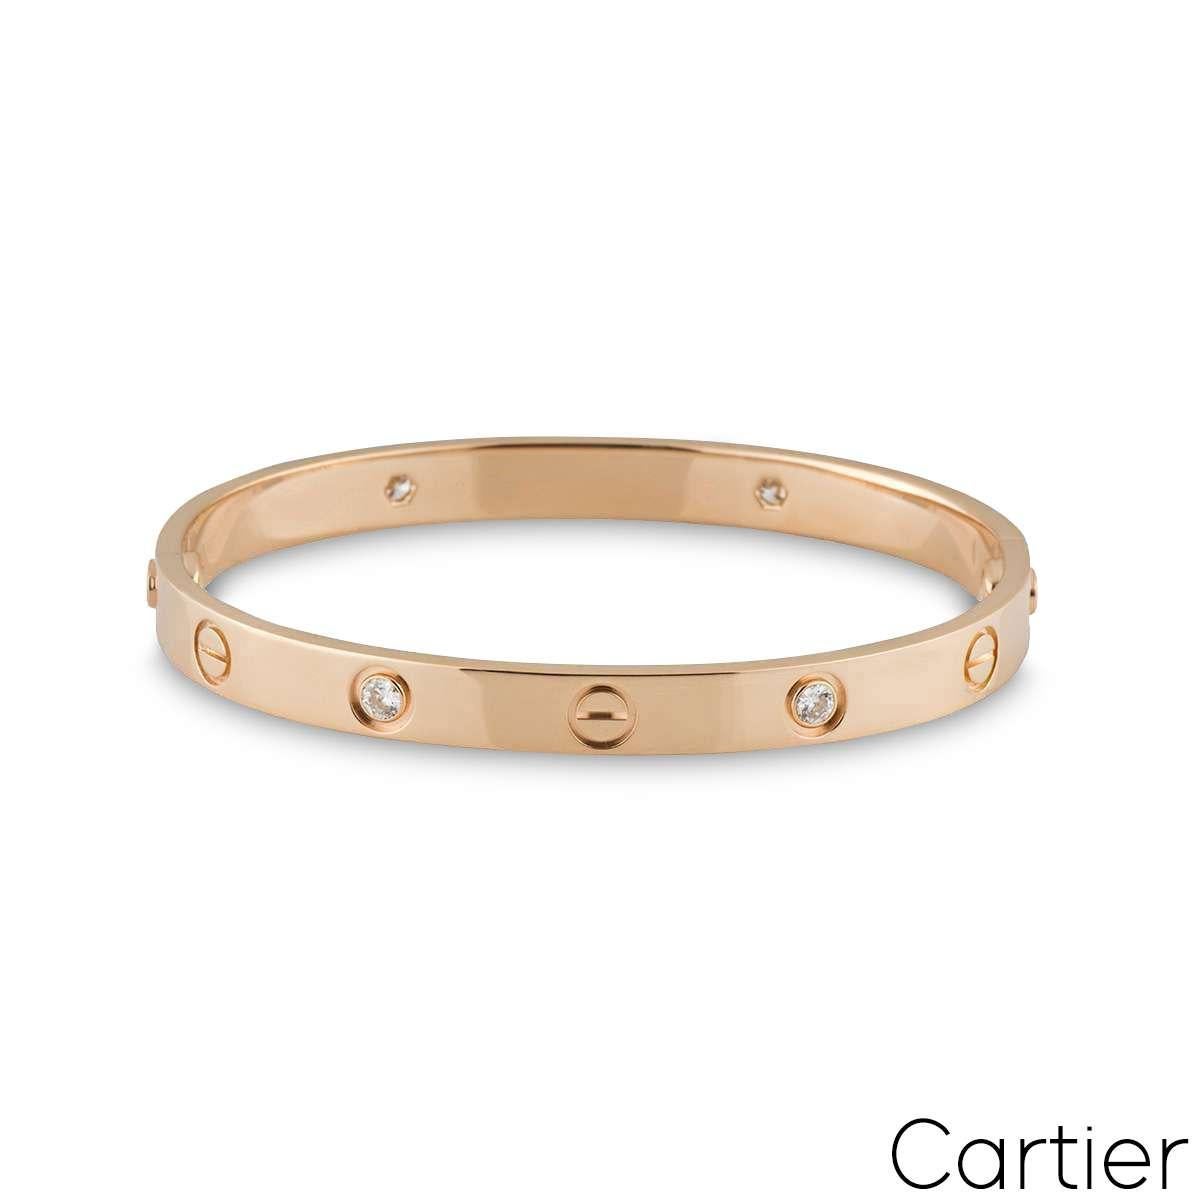 An 18k rose gold Cartier half diamond bracelet from the Love collection. Comprising of the iconic screw motifs alternating with four round brilliant cut diamonds in a rubover setting with a weight of 0.42ct. The bracelet is a size 18, features the